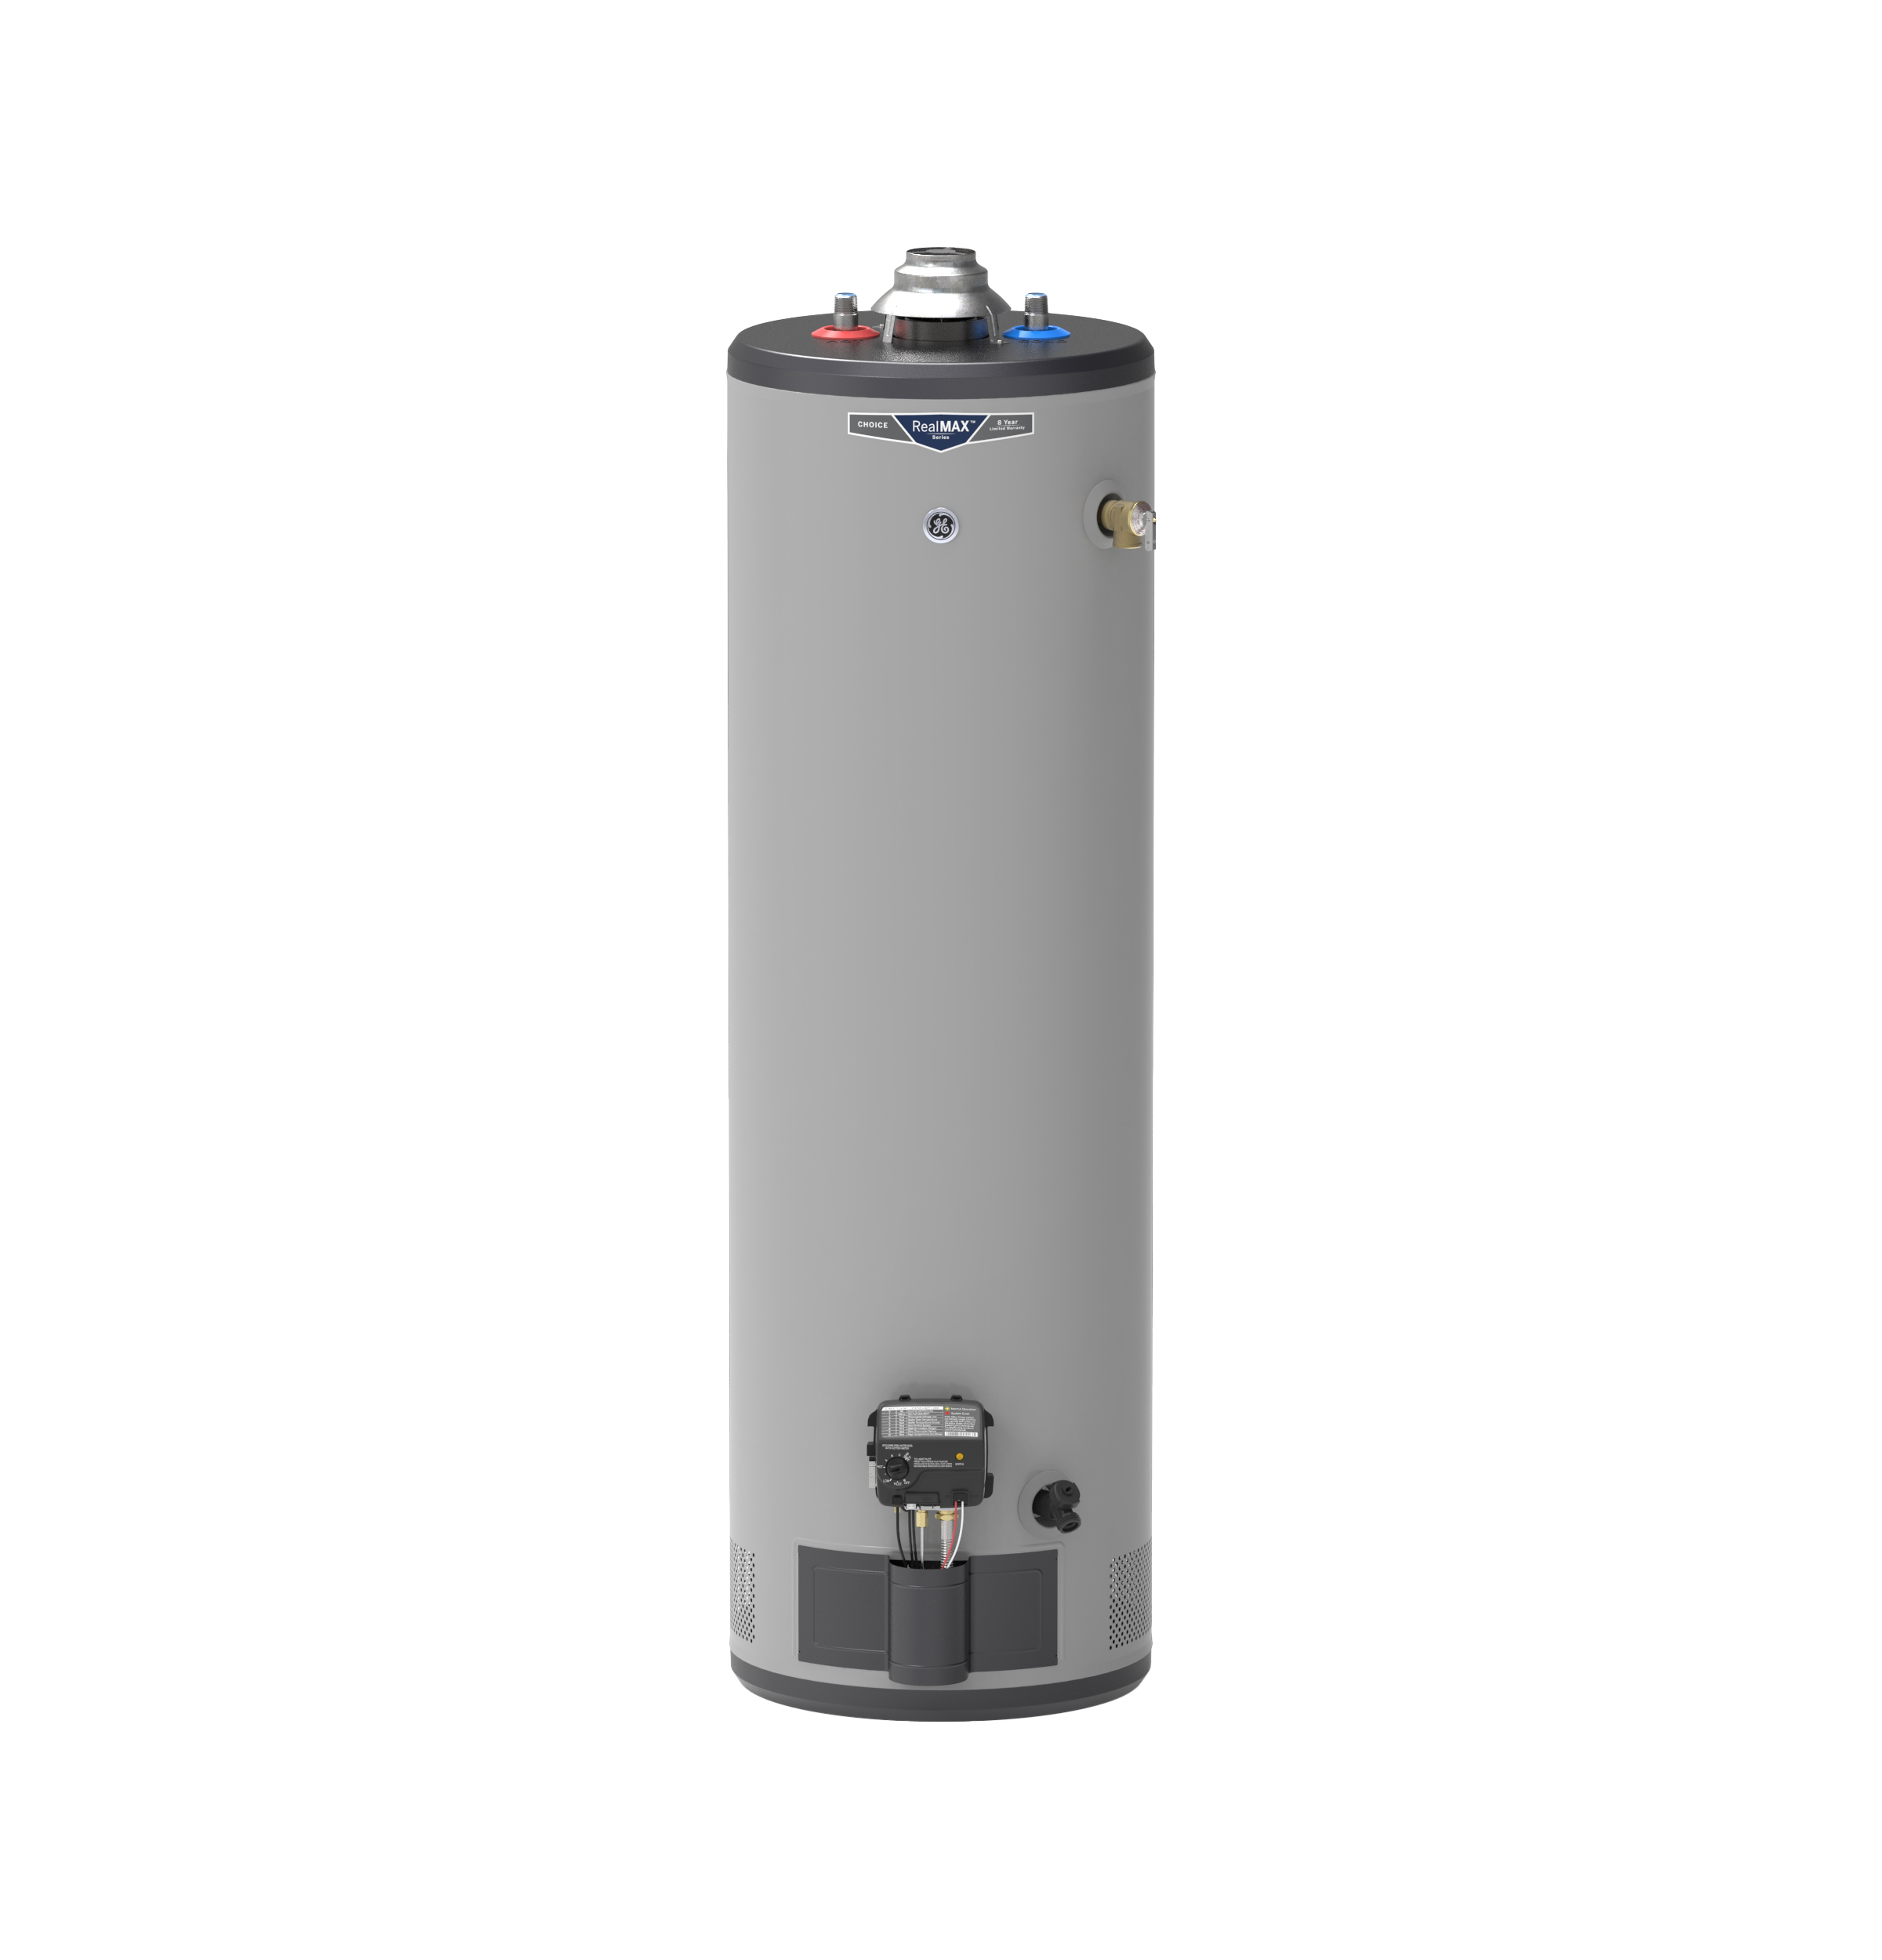 GE GG30T08BXR 30 Gallon, RealMAX Choice Tall Atmospheric Vent Water Heater - Natural Gas - 8 Year Warranty